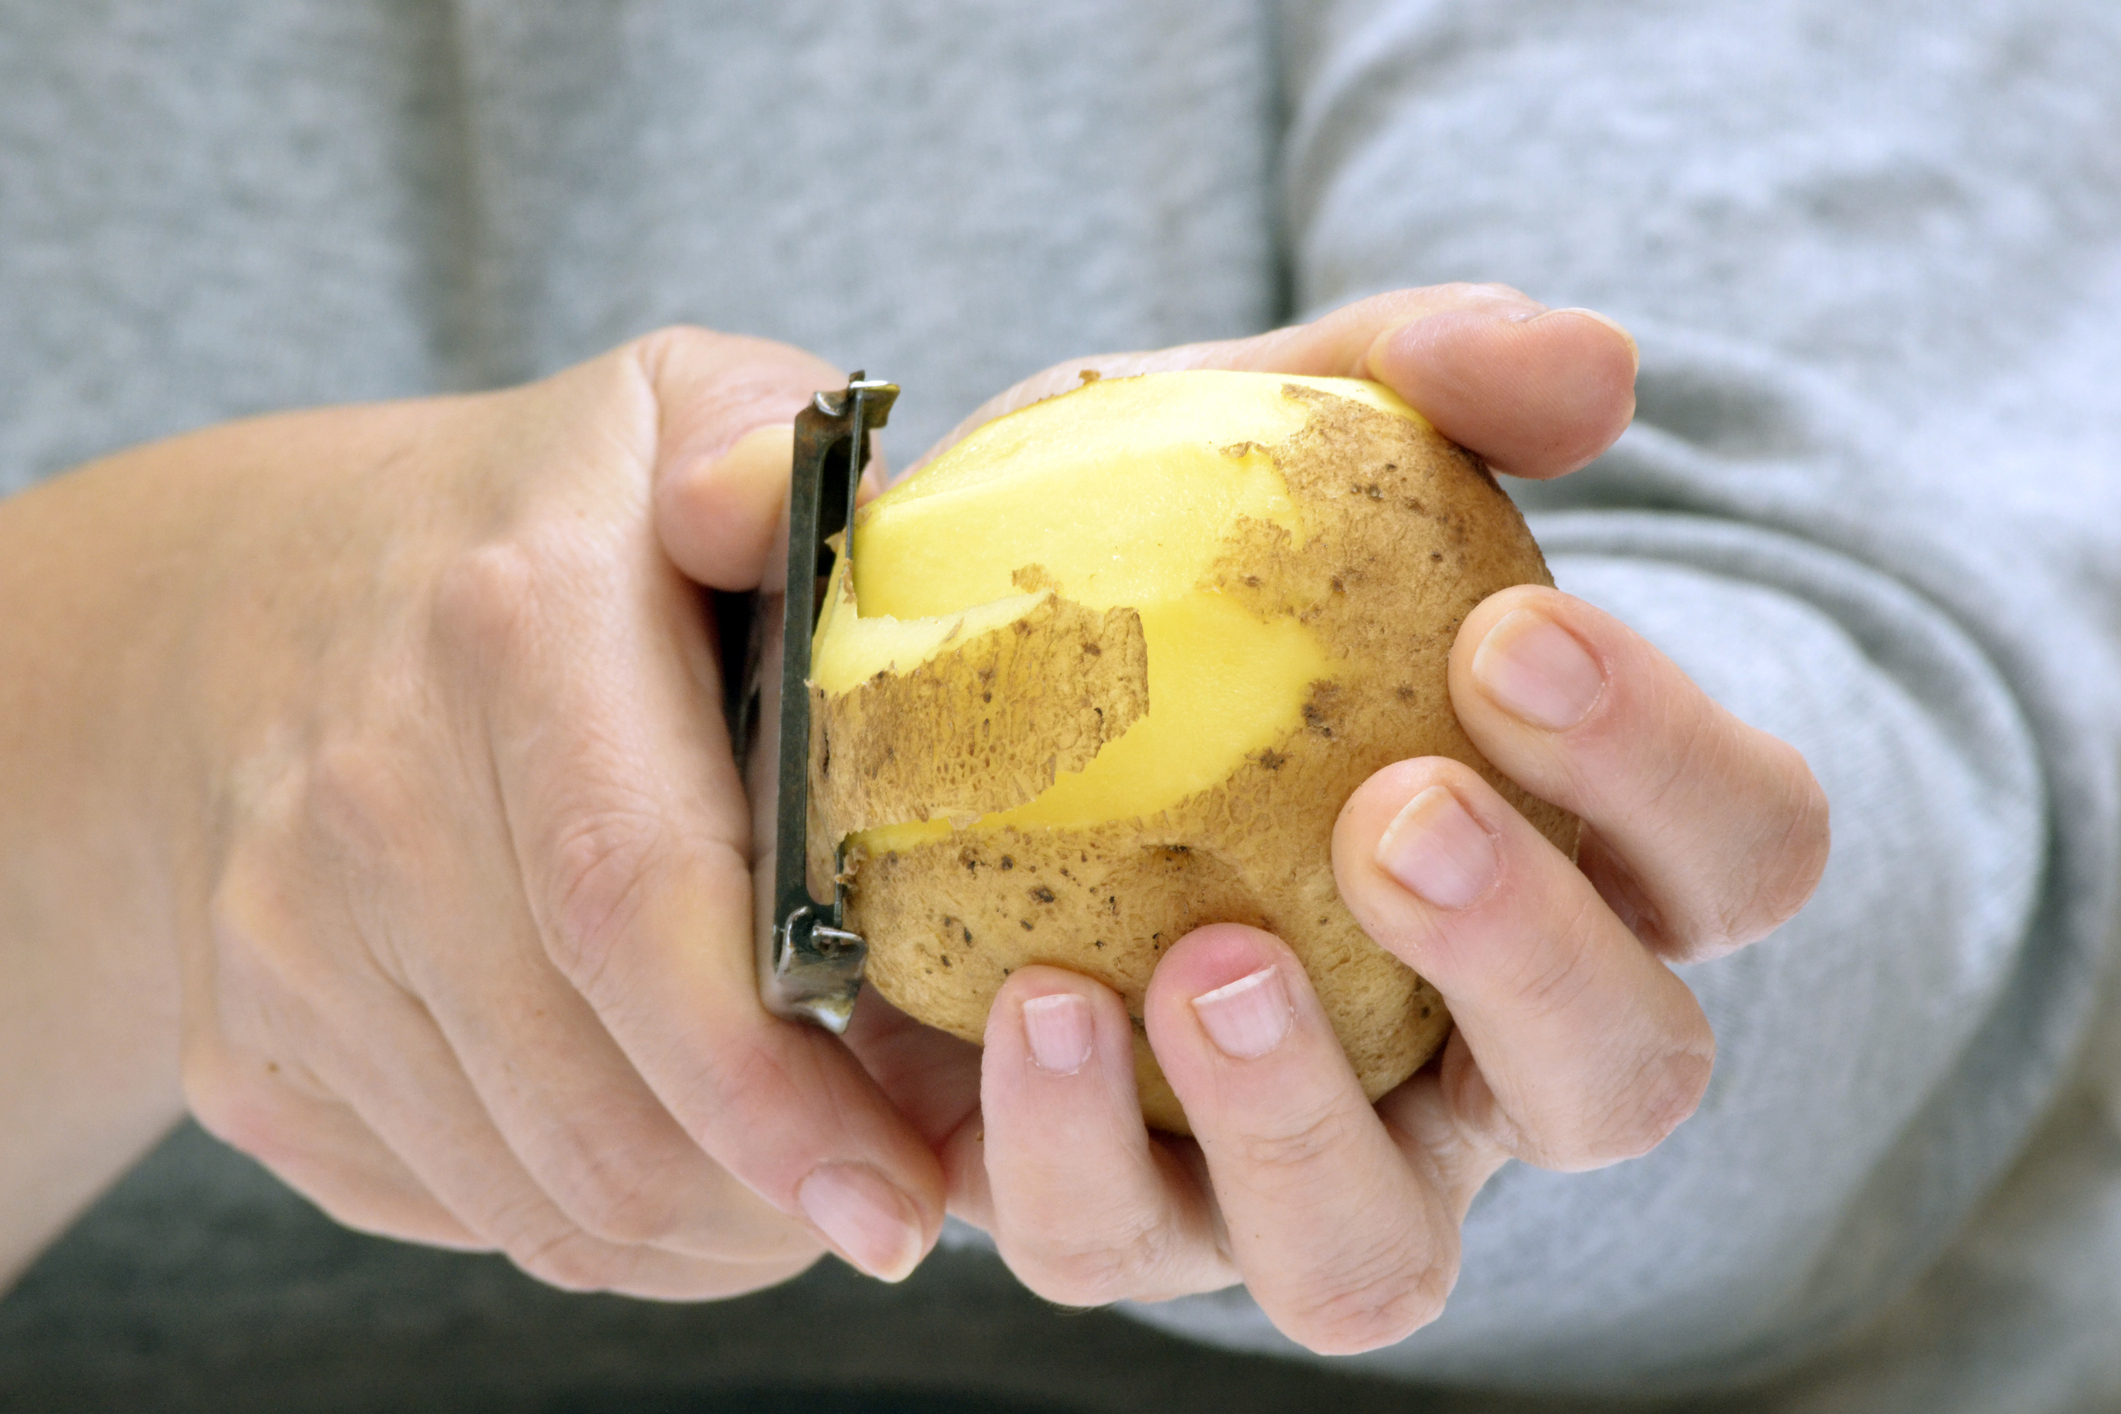 How potatoes can help pump up your muscles